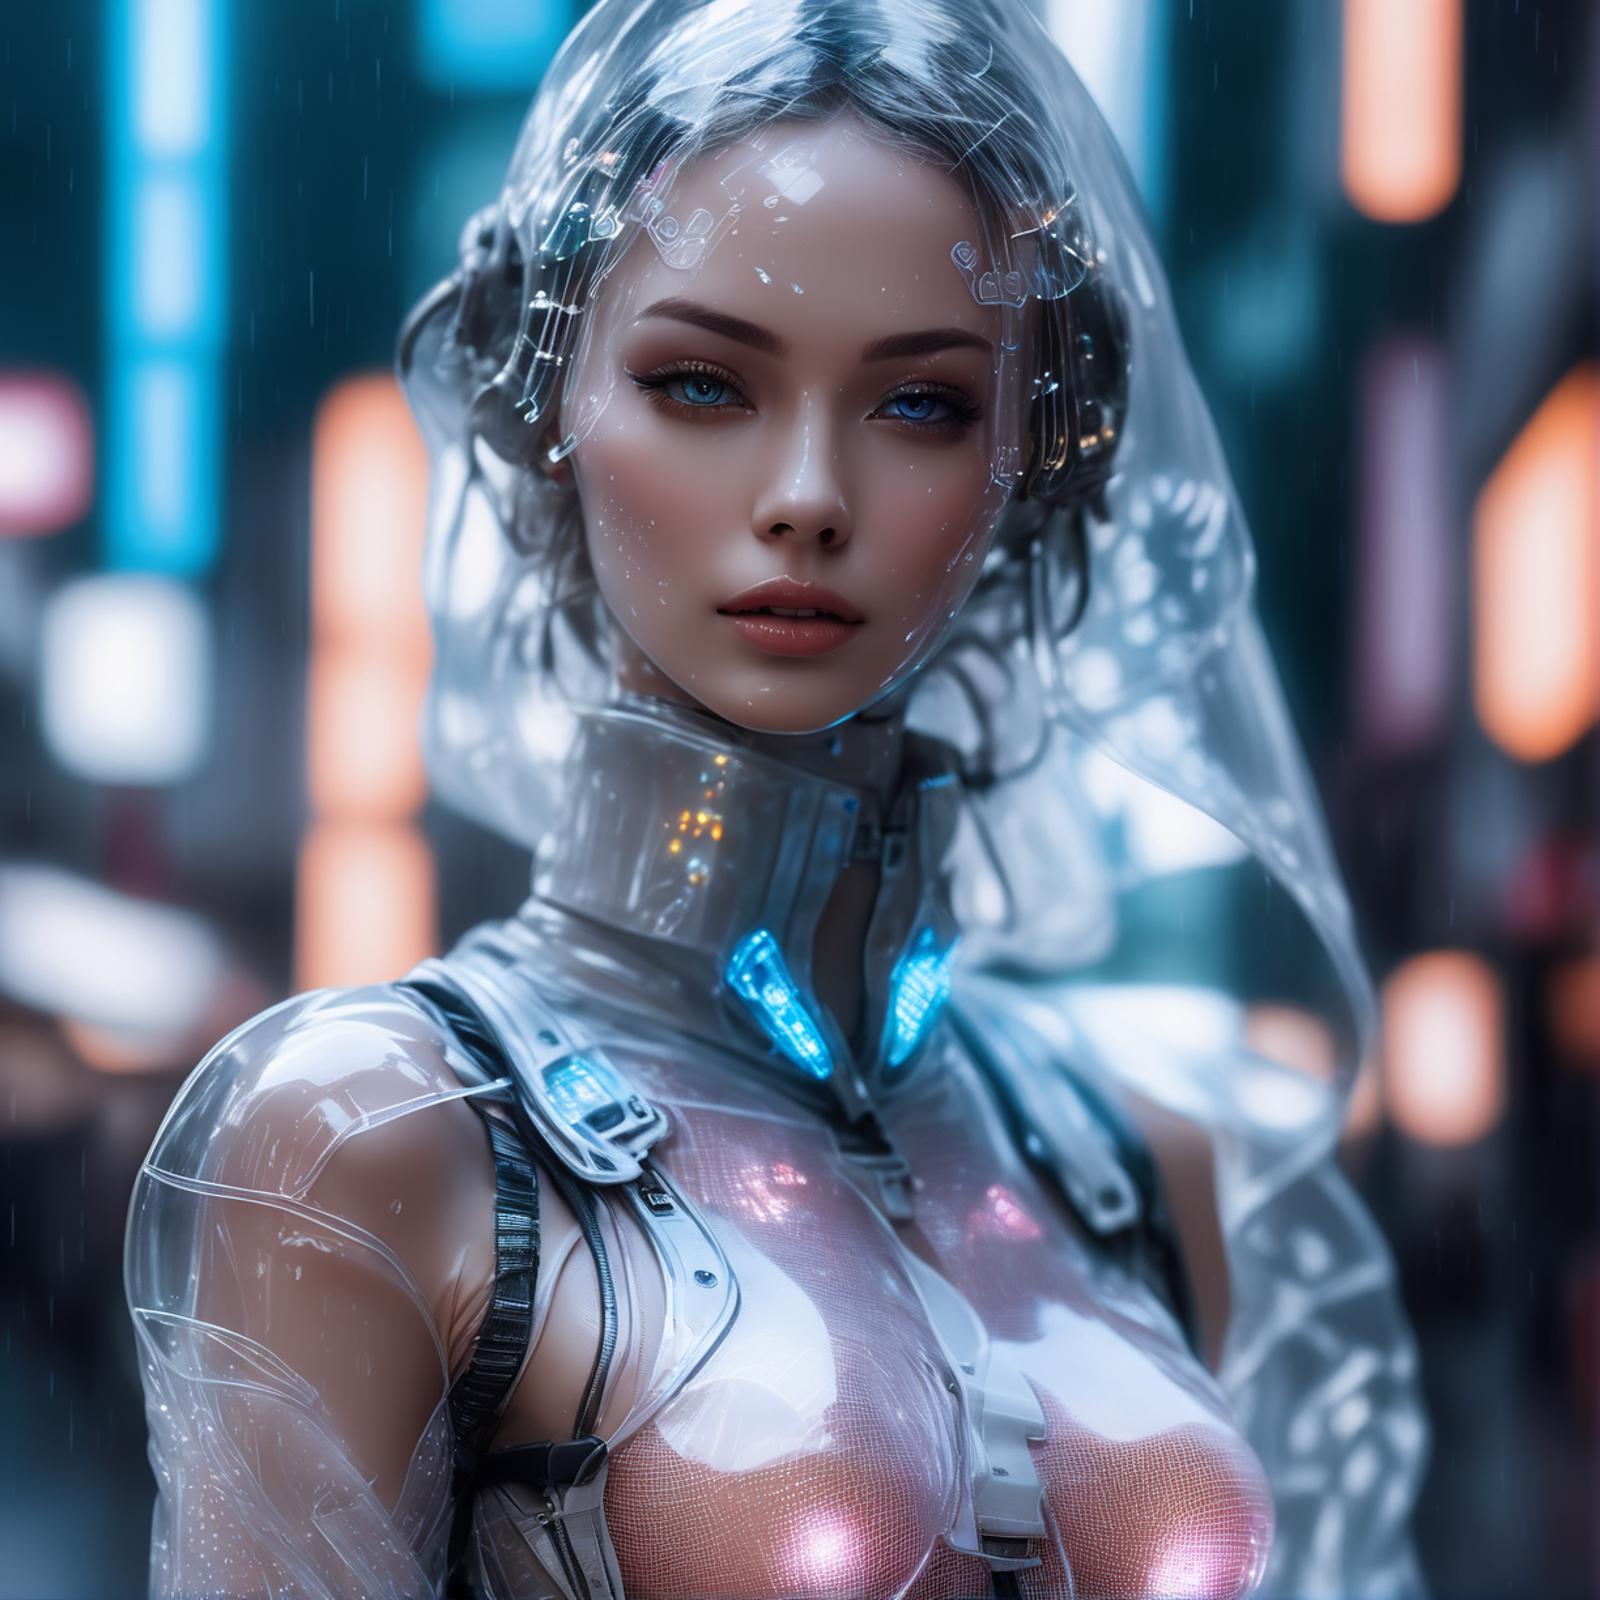 A futuristic robotic woman with blue eyes and a white dress.